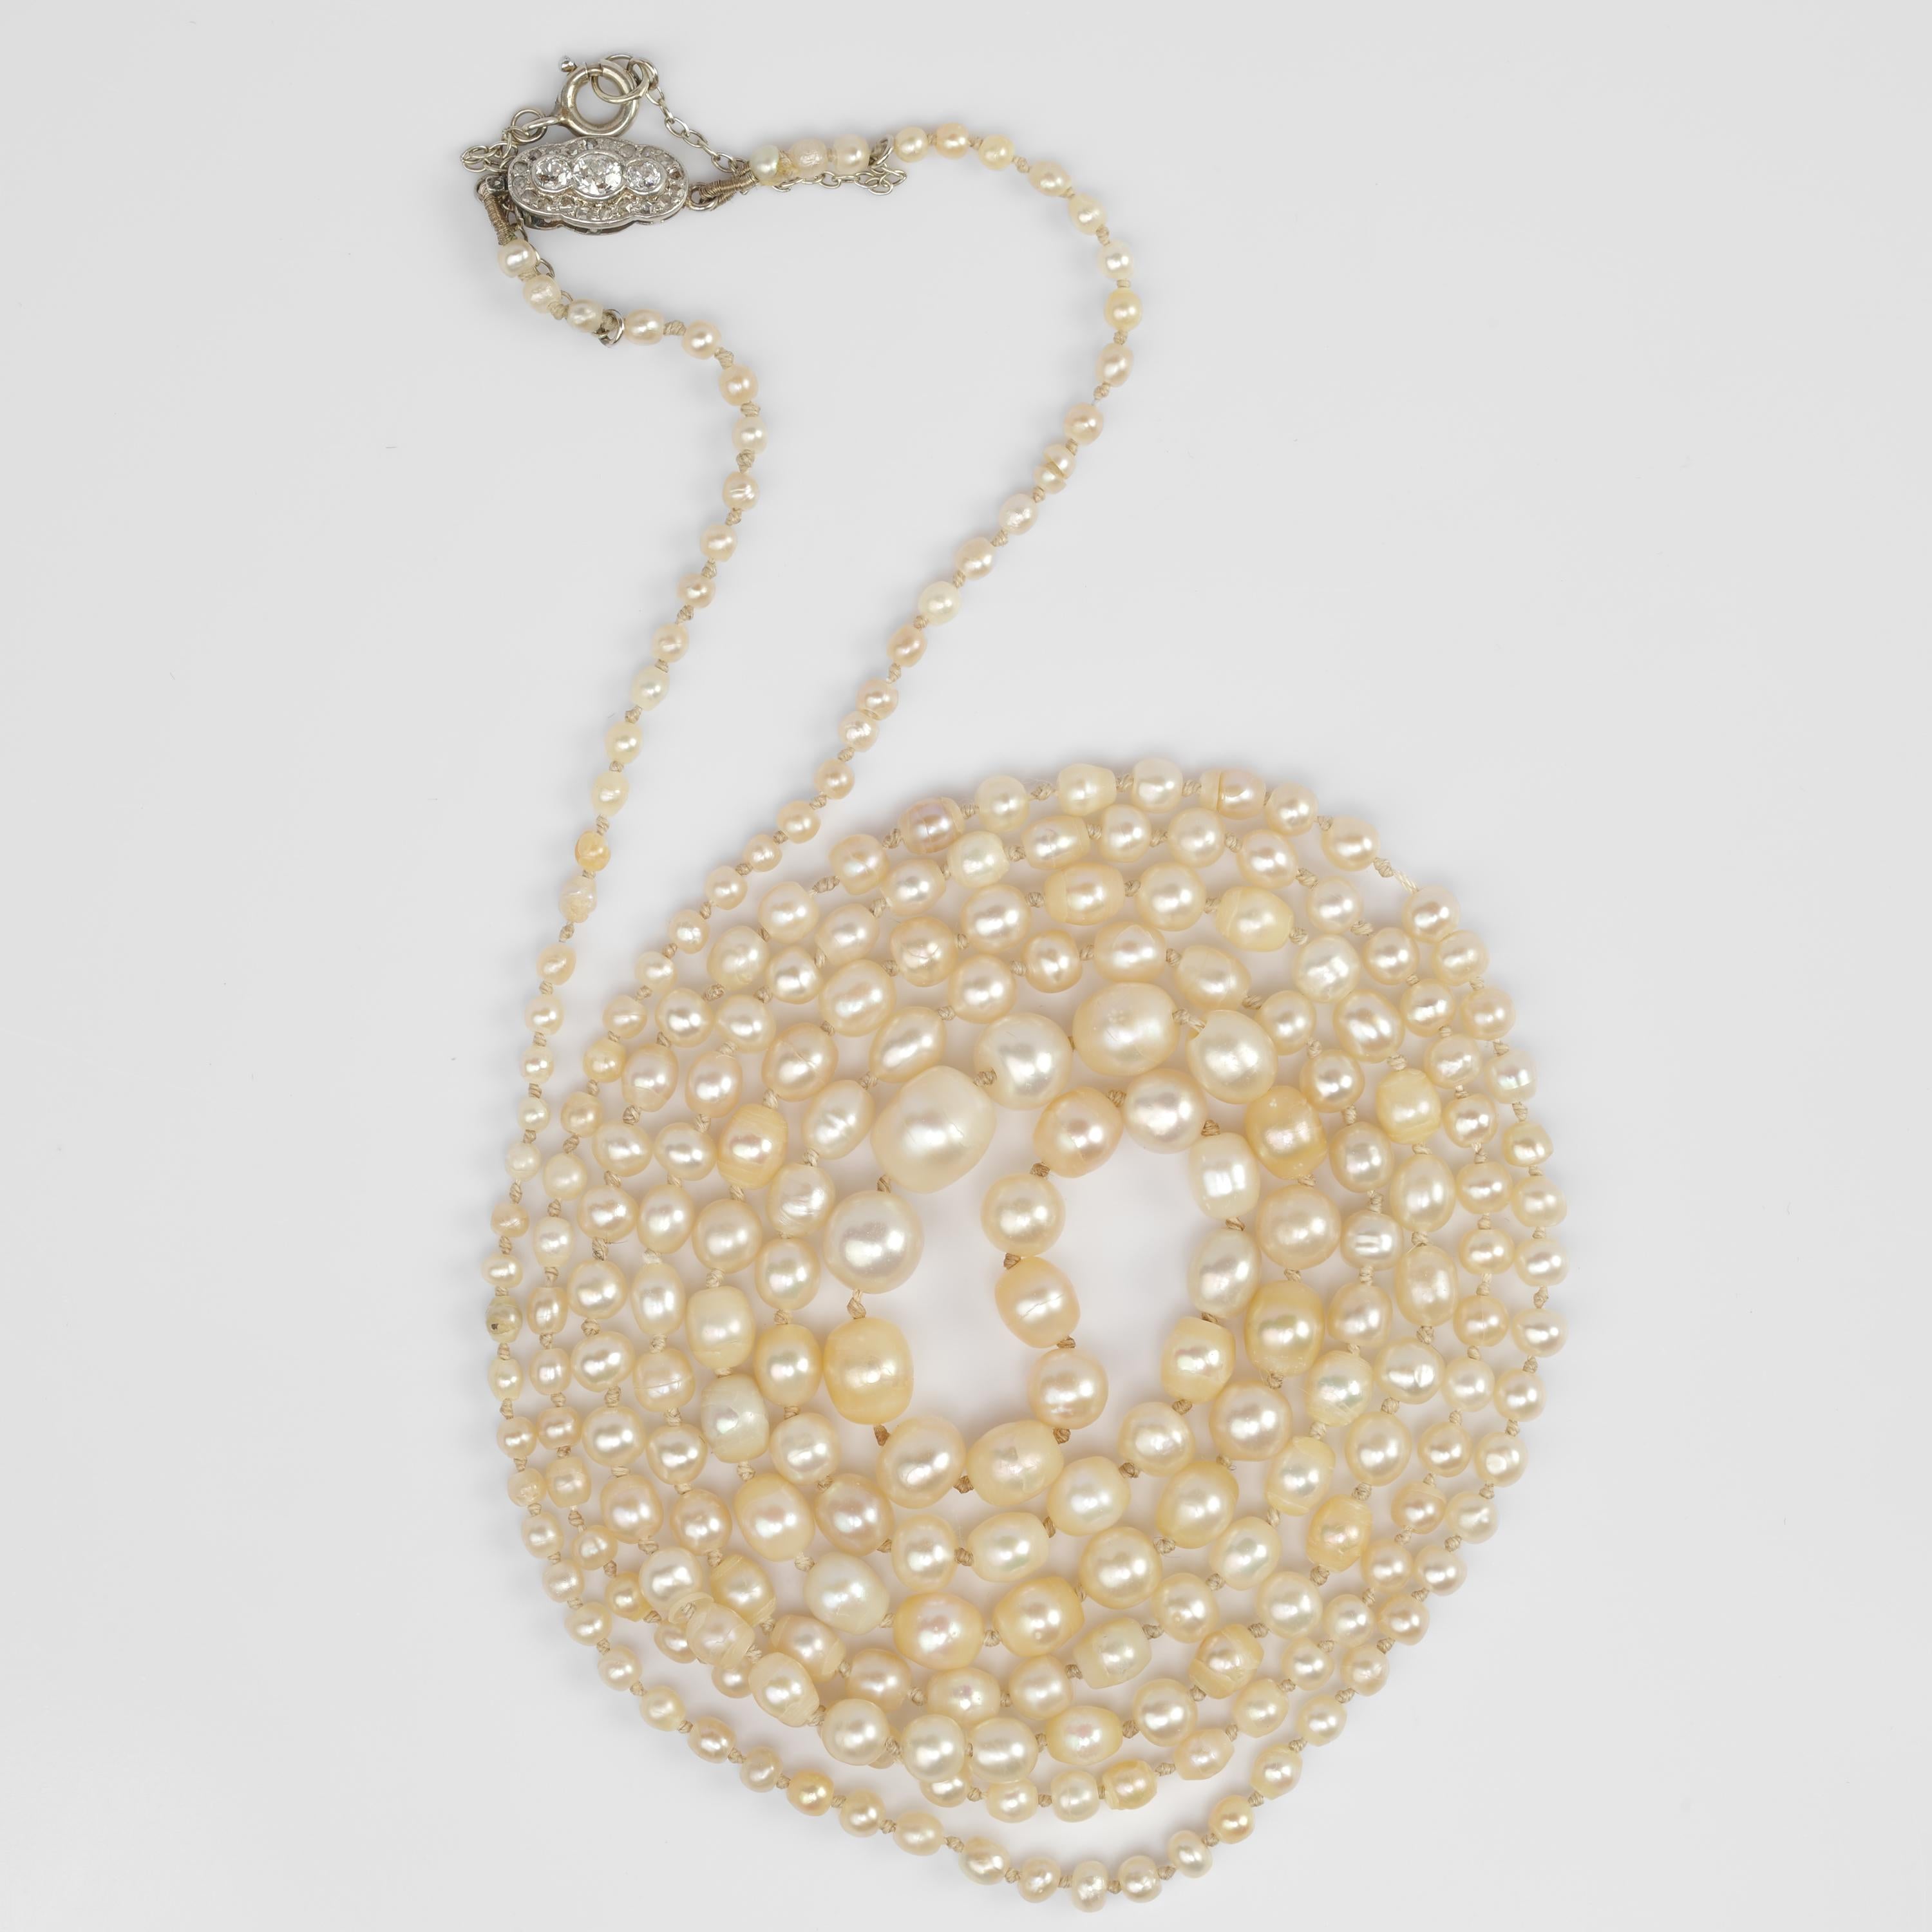 A devastatingly beautiful –and equally rare– strand of natural saltwater pearls measuring 43